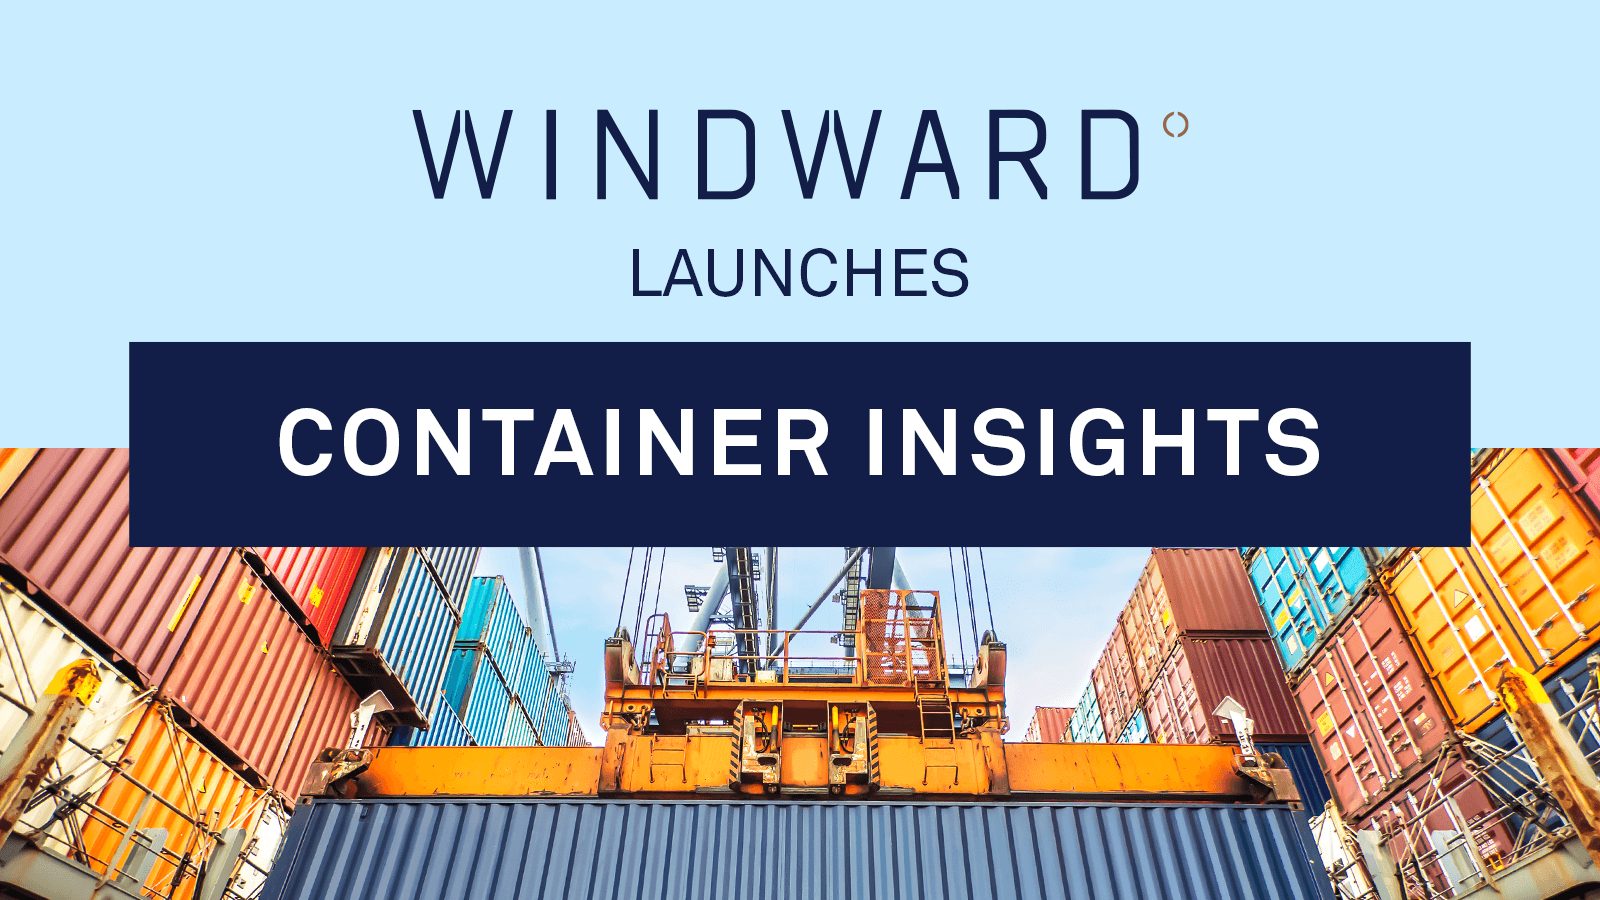 Container insights